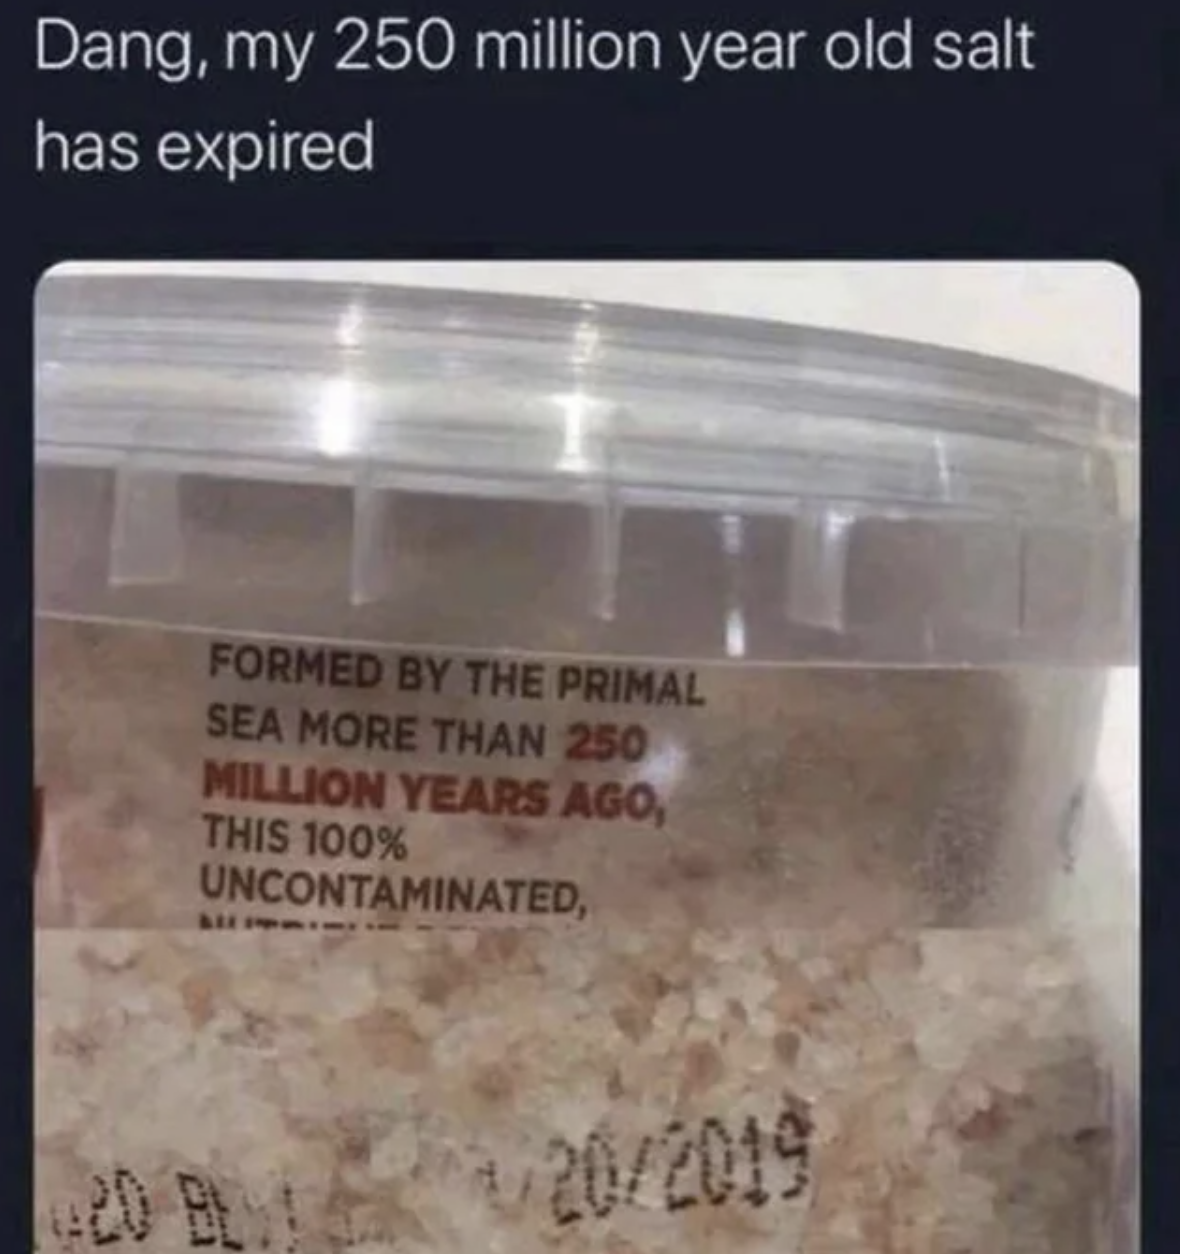 Facepalms - 250 million year old salt - Dang, my 250 million year old salt has expired Formed By The Primal Sea More Than 250 Million Years Ago, This 100% Uncontaminated, 32